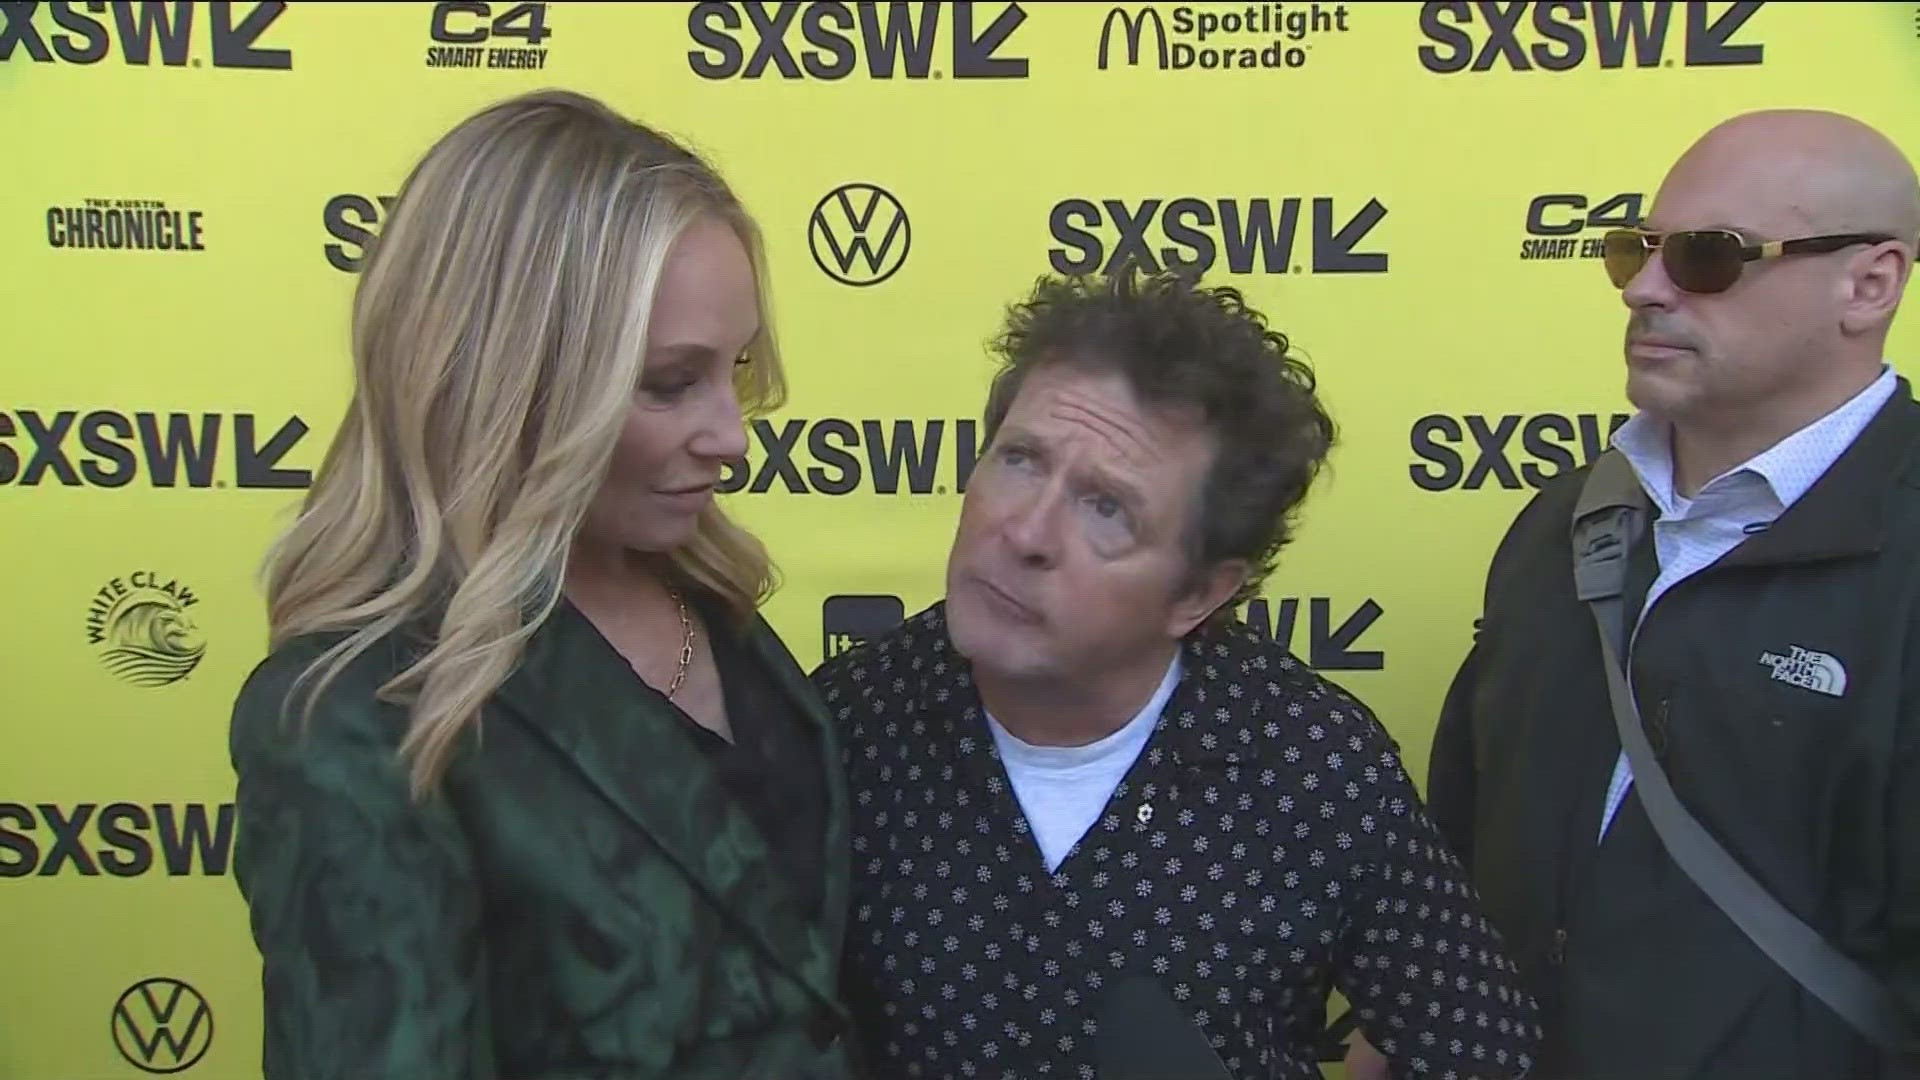 As South by Southwest continues, we're seeing more celebrities in Austin! Michael J. Fox was in town Tuesday for the screening of "Still: A Michael J. Fox Movie."